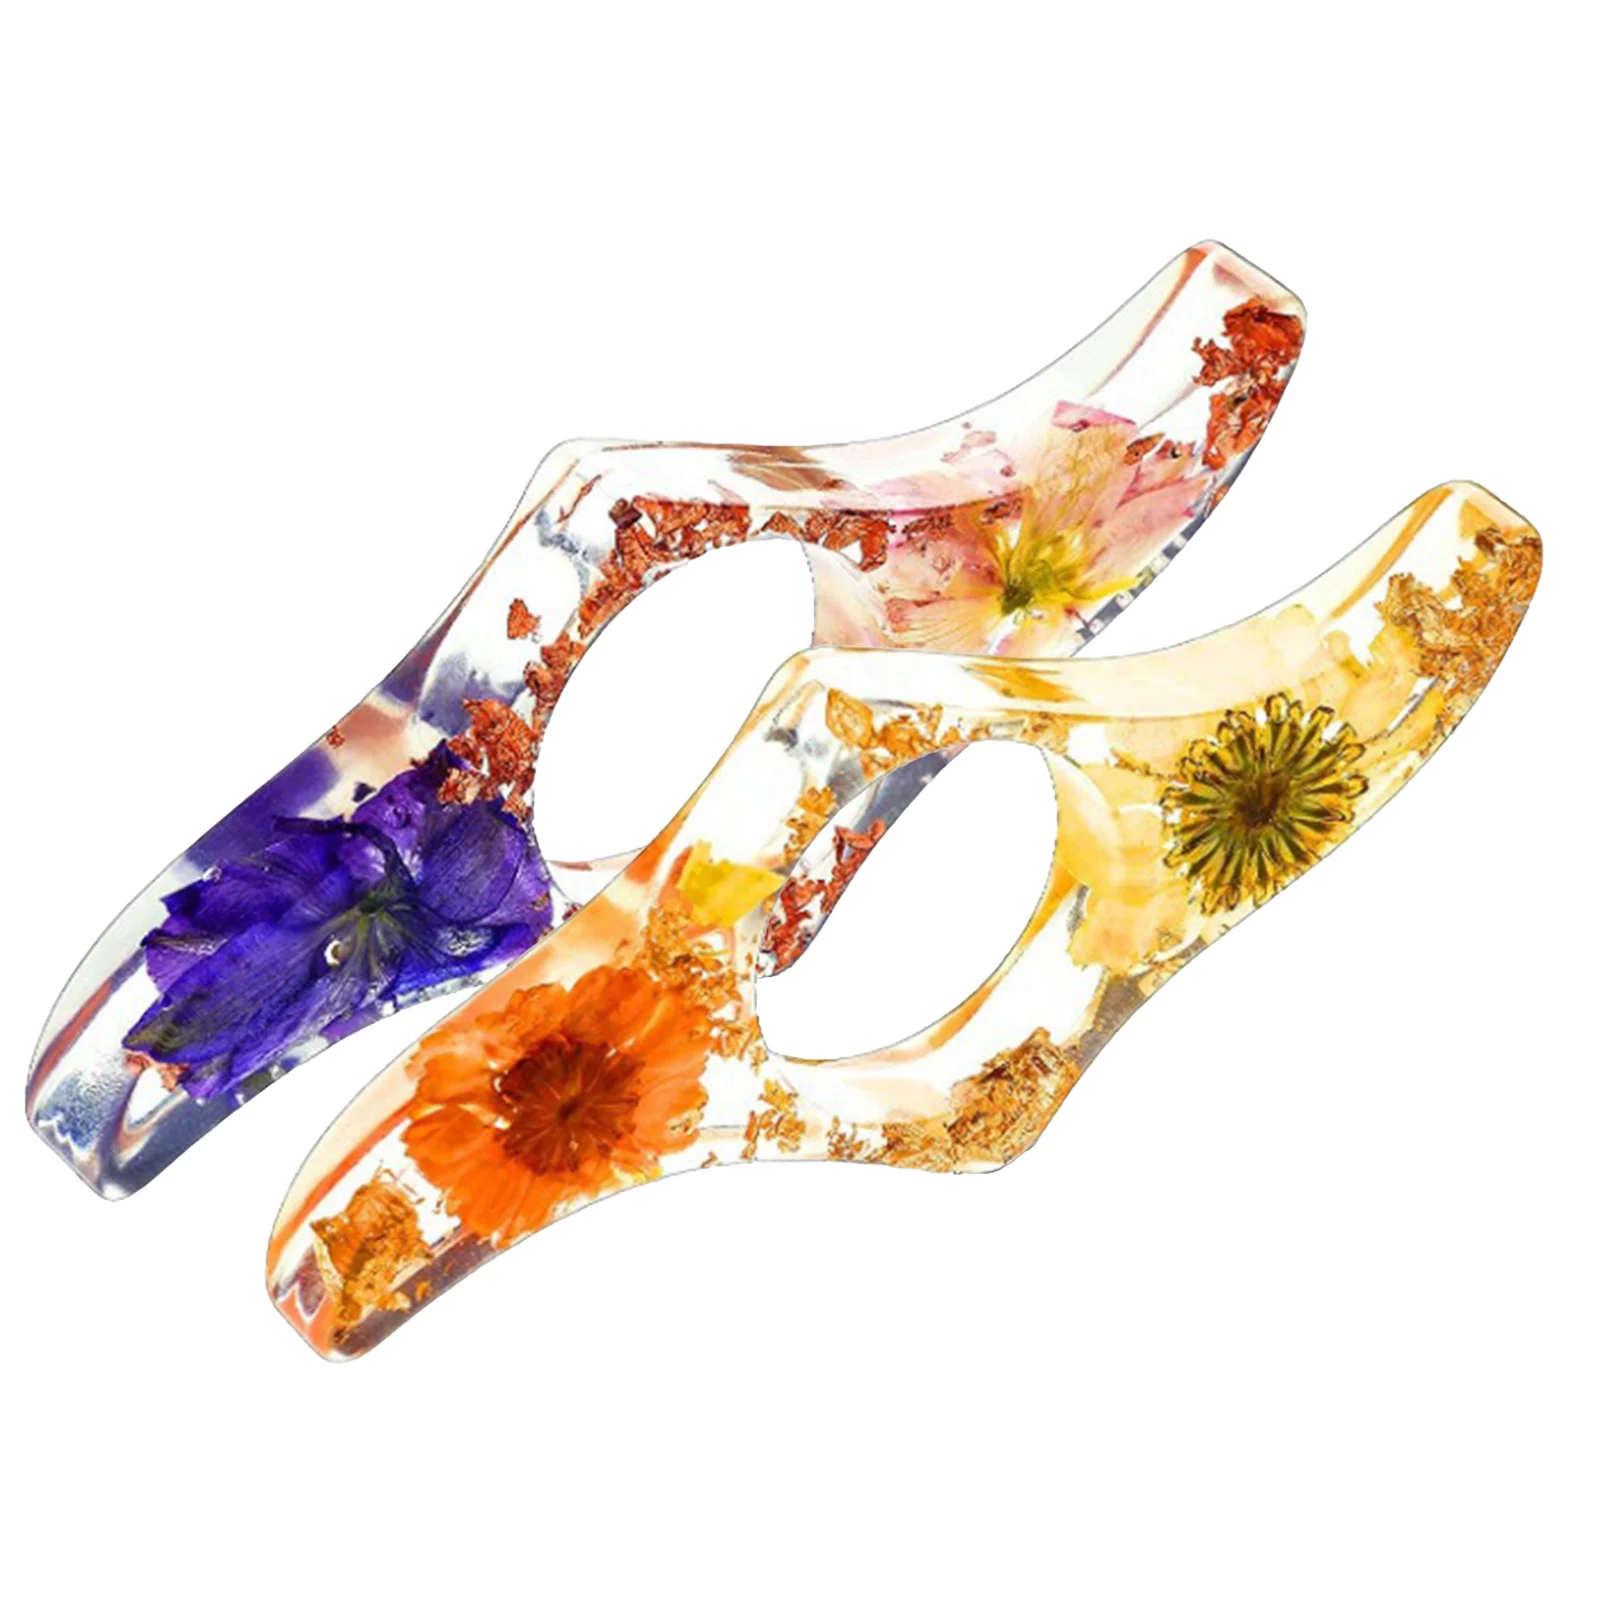 

2pcs Dried Flower Resin Bookmark Portable Teacher Student Home Office Lightweight Bookworm Literary Thumb Ring Page Holder